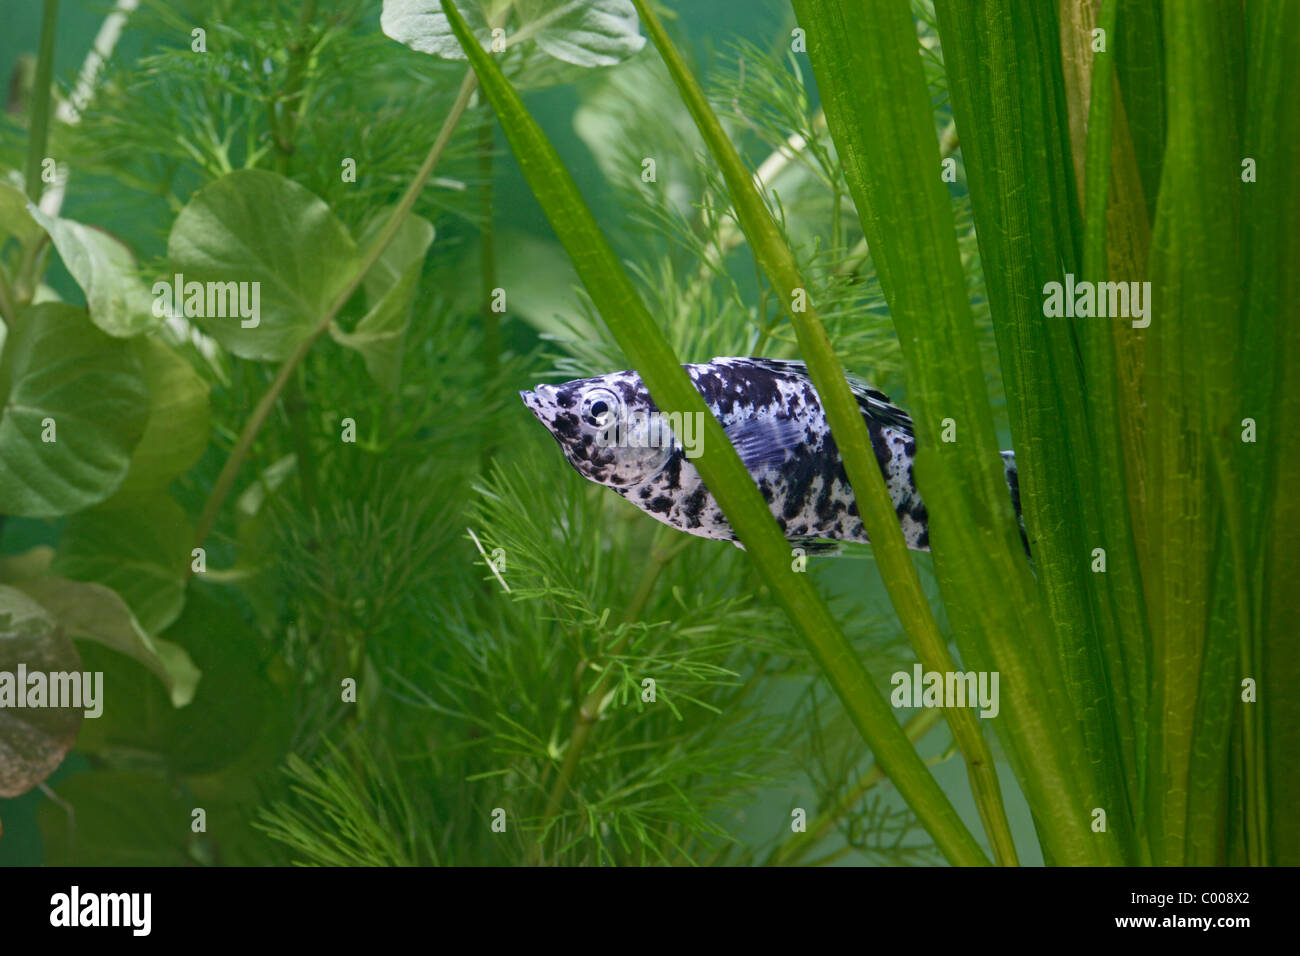 Dalmation Molly ( Poecilia sphenops ) hiding in weeds - varient Stock Photo